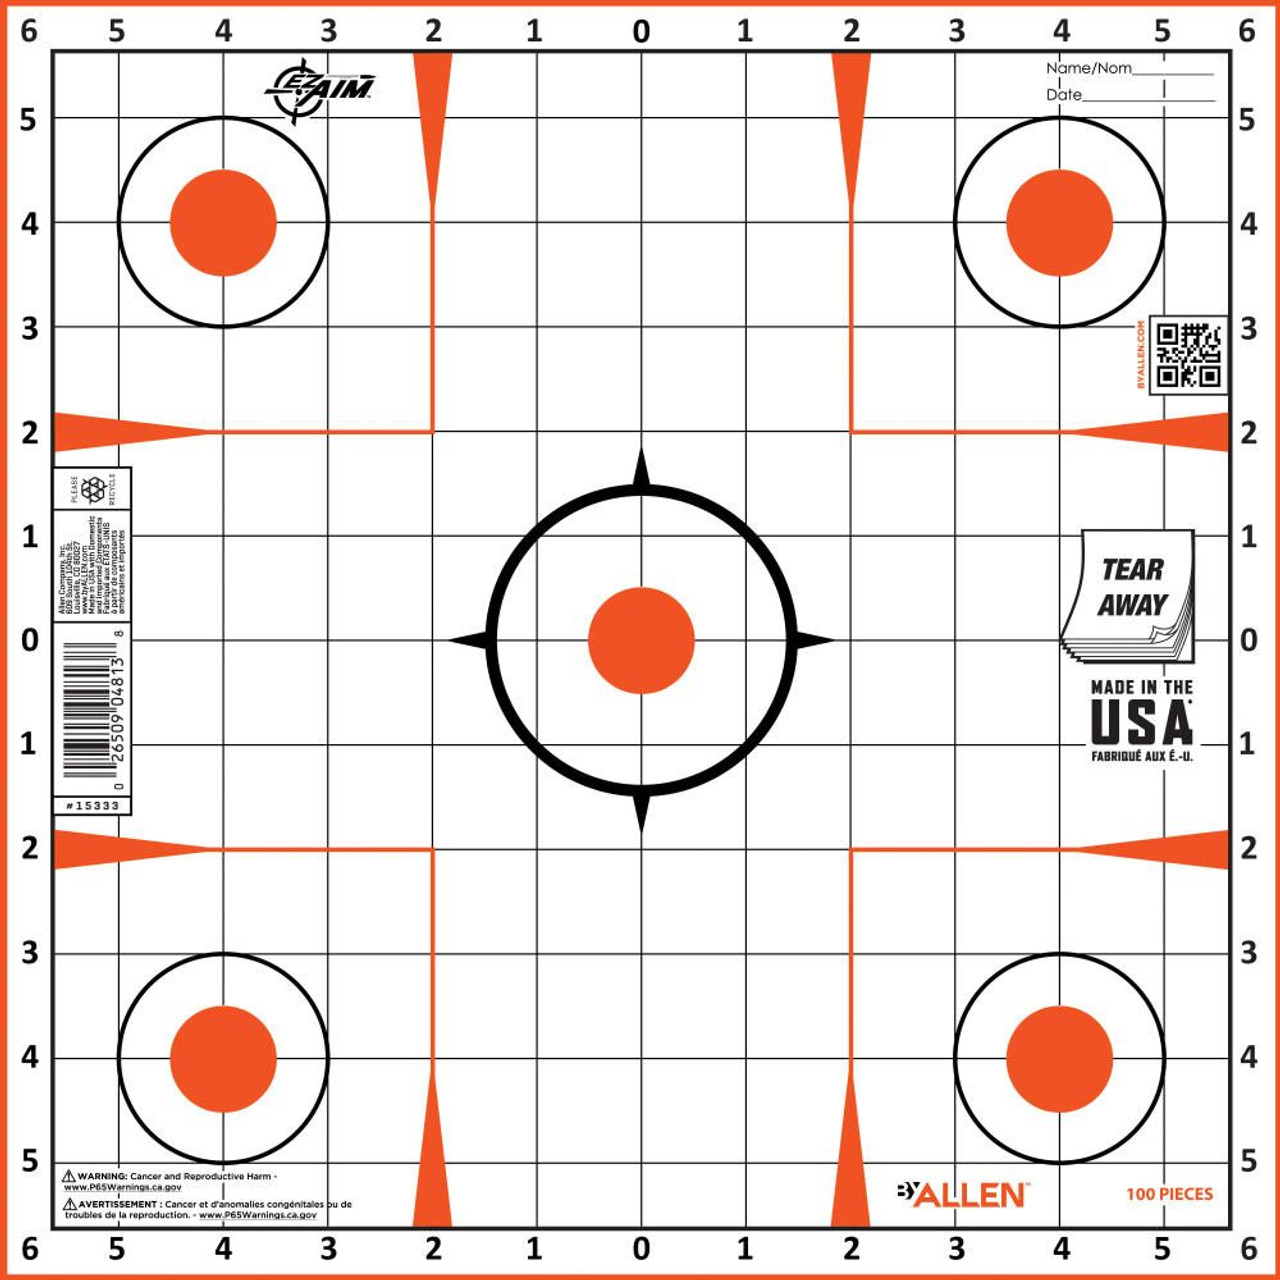 The EZ Aim® Sight Grid Target is a great all purpose target. The bound design is easy to handle and keeps targets looking great. It has five aiming points on a one-inch grid background. The grid background makes sight or scope adjusting easier. The target is 12 x 12 inches. Two color print, Aiming points are one inch, bright orange color. Black gridlines and details. 100 targets per pack

Product Features
Grid background make scope adjusting easier
Five aiming points
Orange and Black Print
Aiming points are 1 inch diameter
One Inch grid pattern
100 Targets per pack